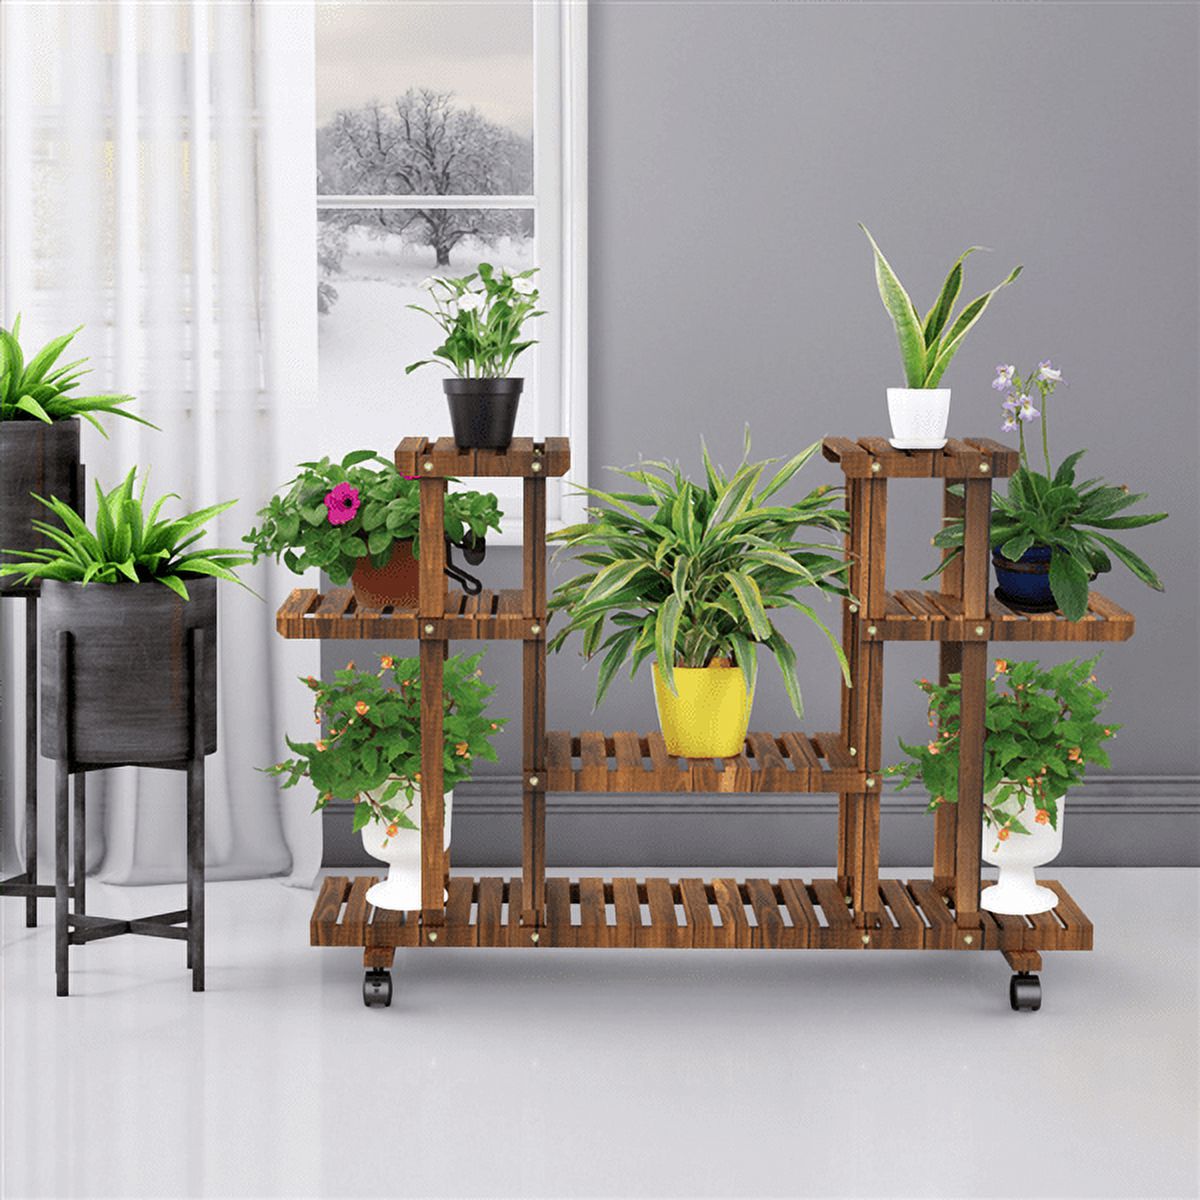 SmileMart 4-Tier 6-Shelf Rolling Wooden Flower Display Stand for Indoors or Outdoors - image 2 of 6